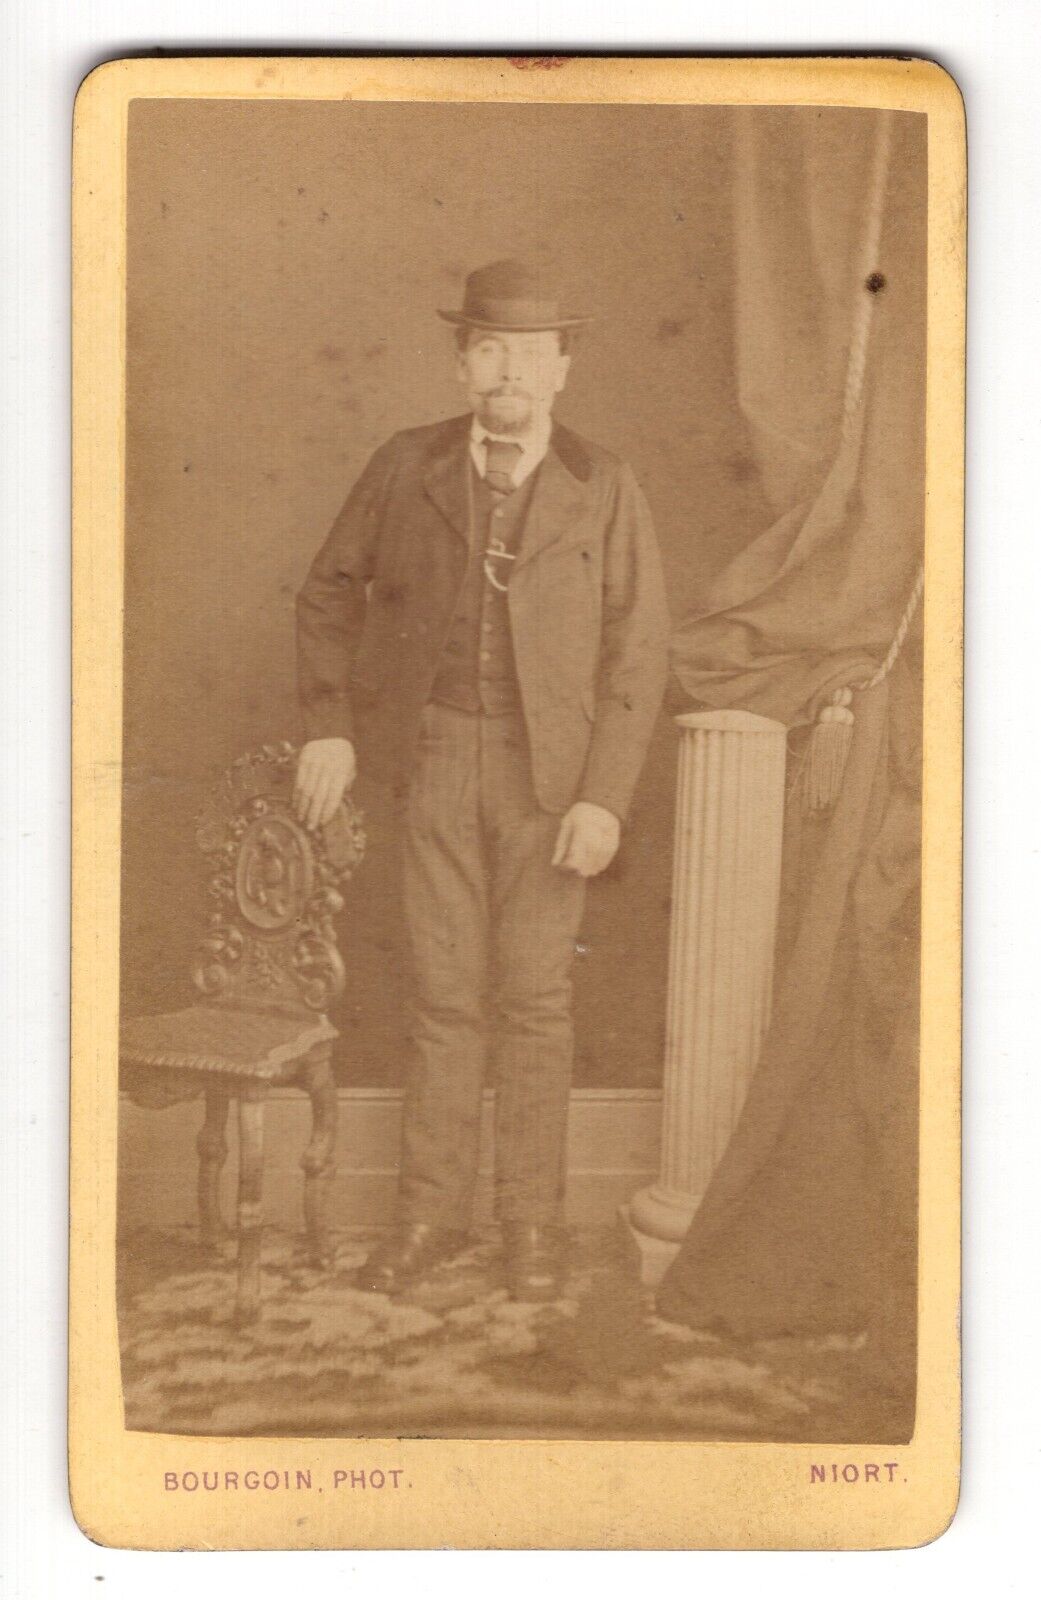 CIRCA 1870s CDV BOURGOIN BEARDED MAN IN SUIT WEARING HAT DETAILED NIORT FRANCE